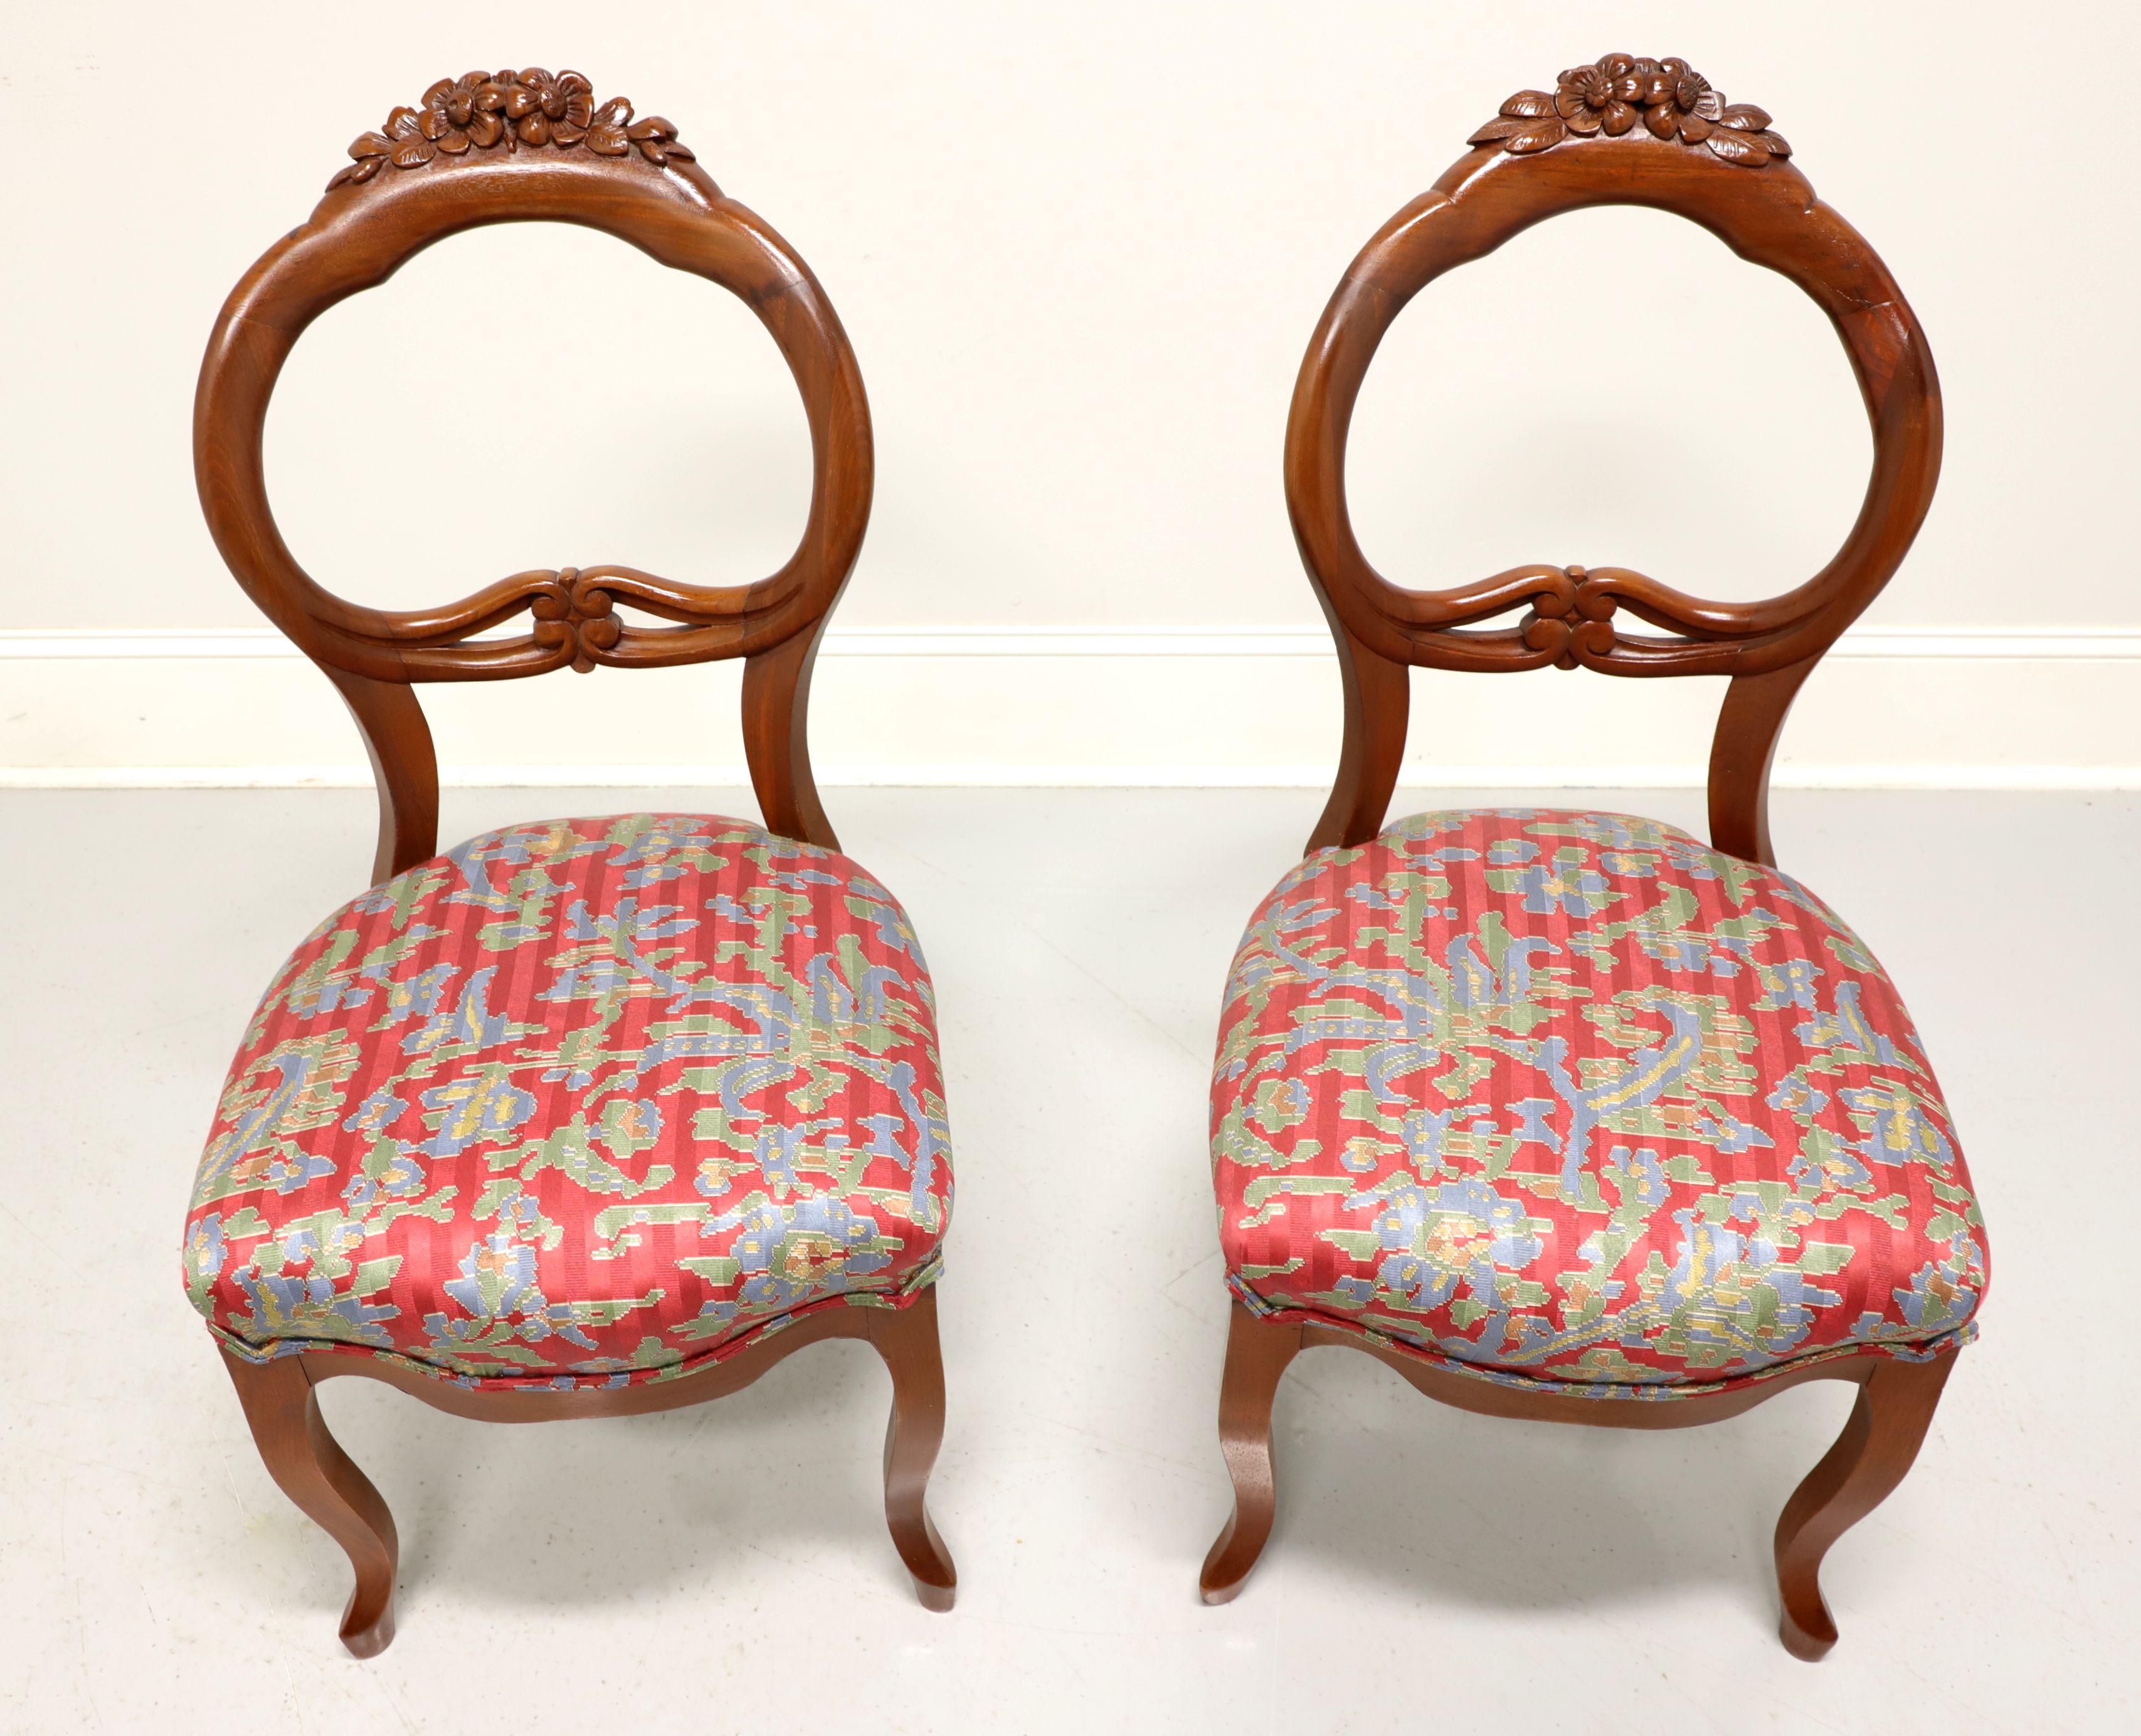 A pair of antique Victorian balloon back side chairs, unbranded. Walnut with decorative floral carving to crest rail, carved backrest, multi-color floral fabric upholstered seat and cabriole legs. Likely made in the USA, in the early 20th